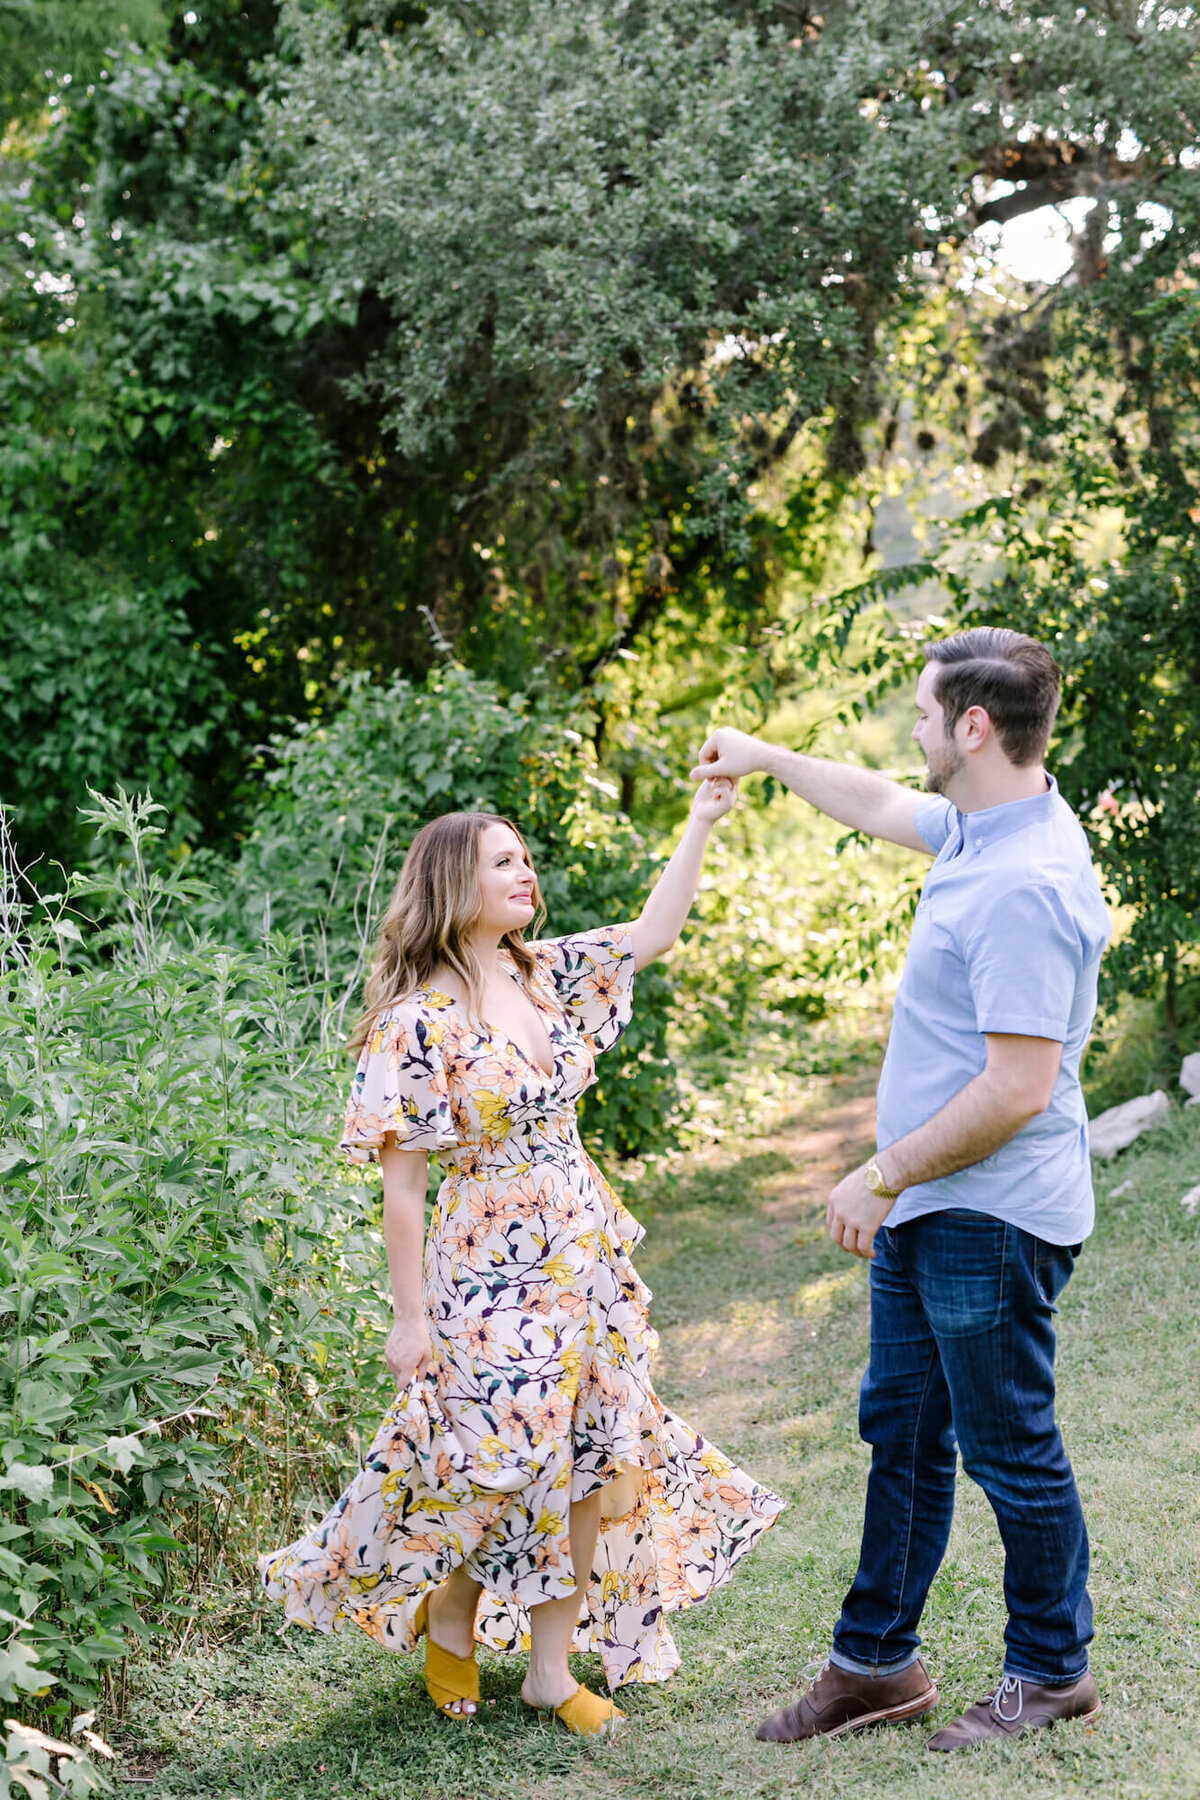 Creekside engagement session in Austin, Texas